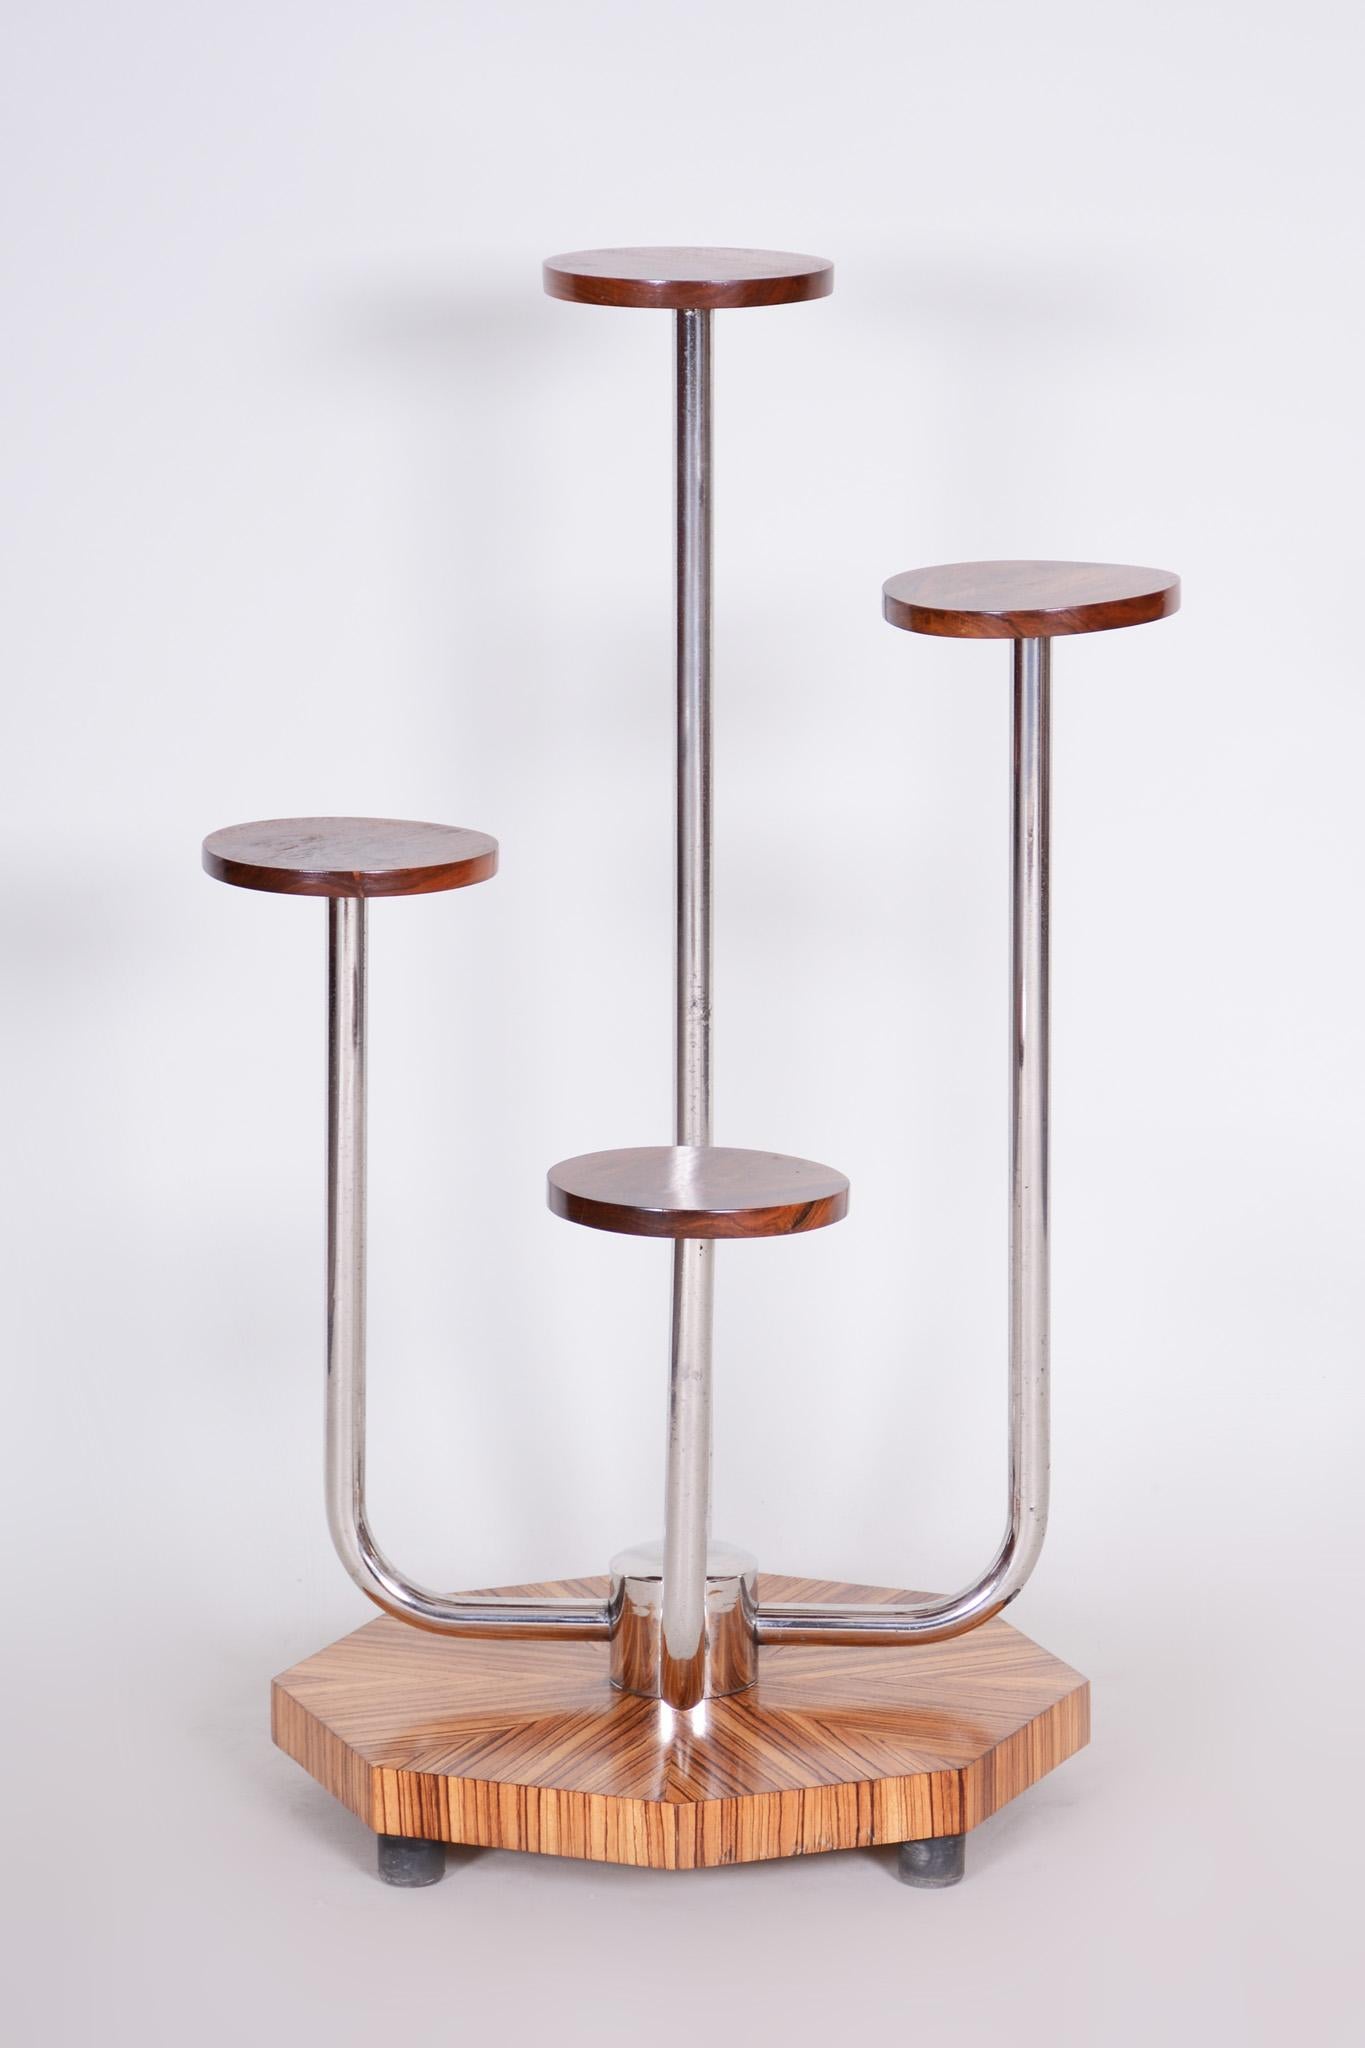 This étagère, with a chrome-plated steel tube and Zebrano wood shelves, was made in the 1930s in the Czech Republic. Original chromium plating in a very nice original condition.

Source: Czechia
Period: 1930-1939
Maker: Mücke-Melder.